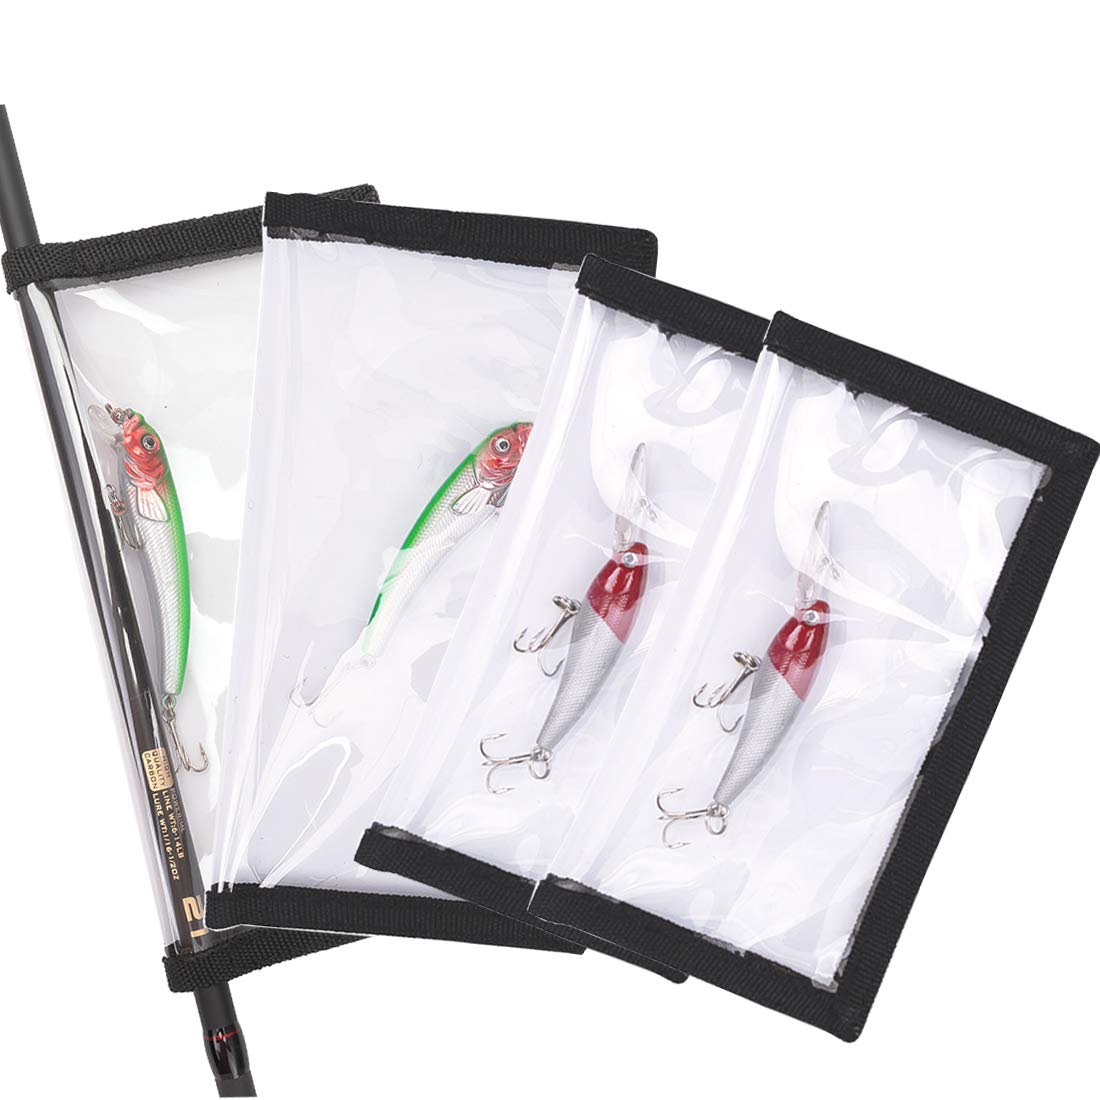 Fishing Lure Wraps 3 Packs Durable Clear PVC Lure Covers Keeps Fishing Safe  Easily See Lures Fishing Hook Covers Bait Storage 3.9 W x 7.9 L